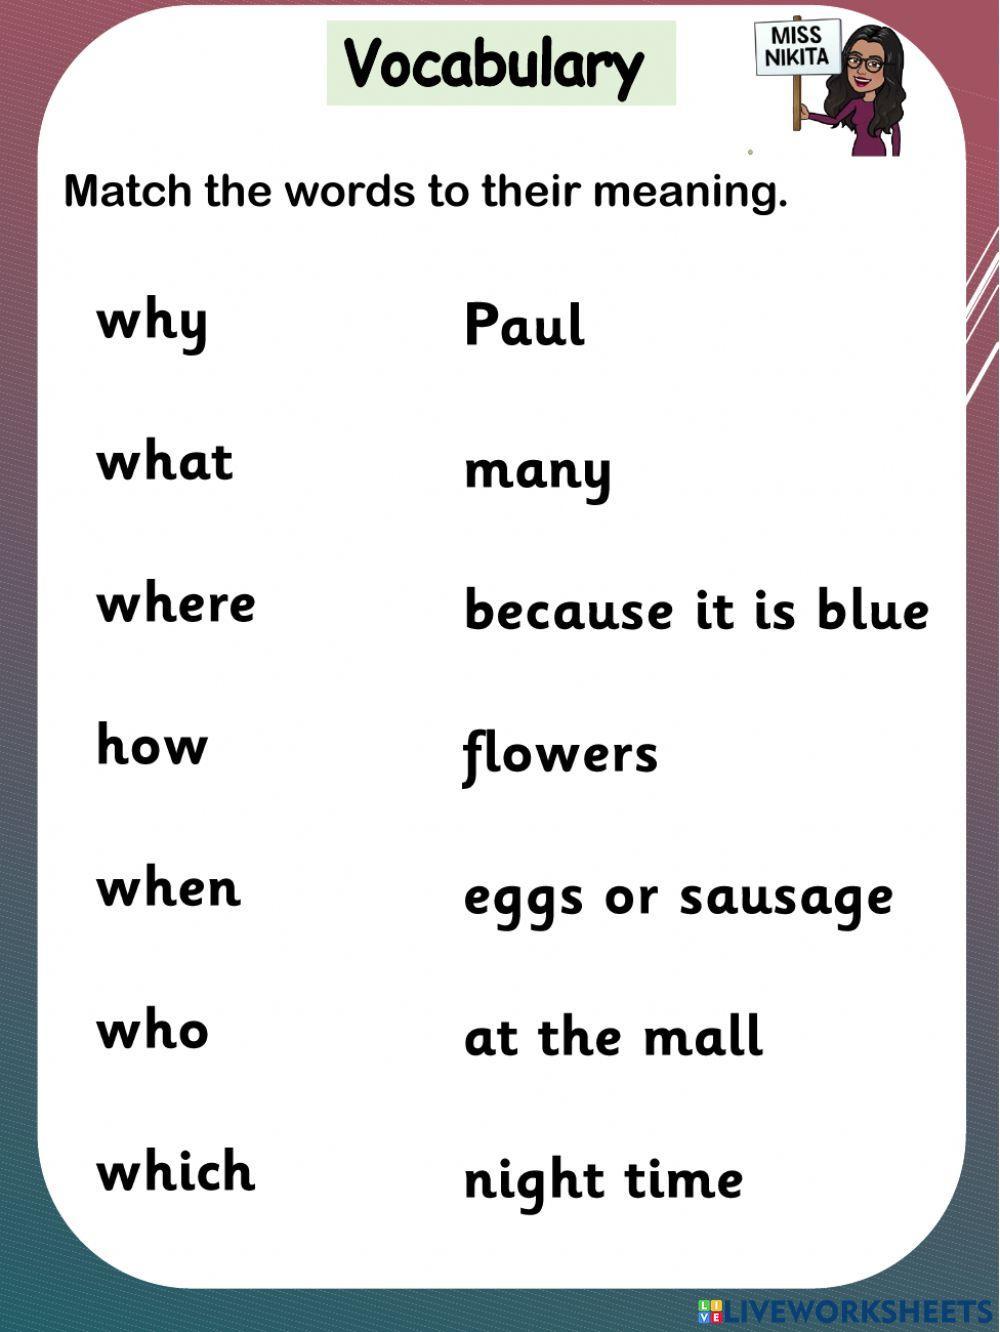 Vocabulary - question words